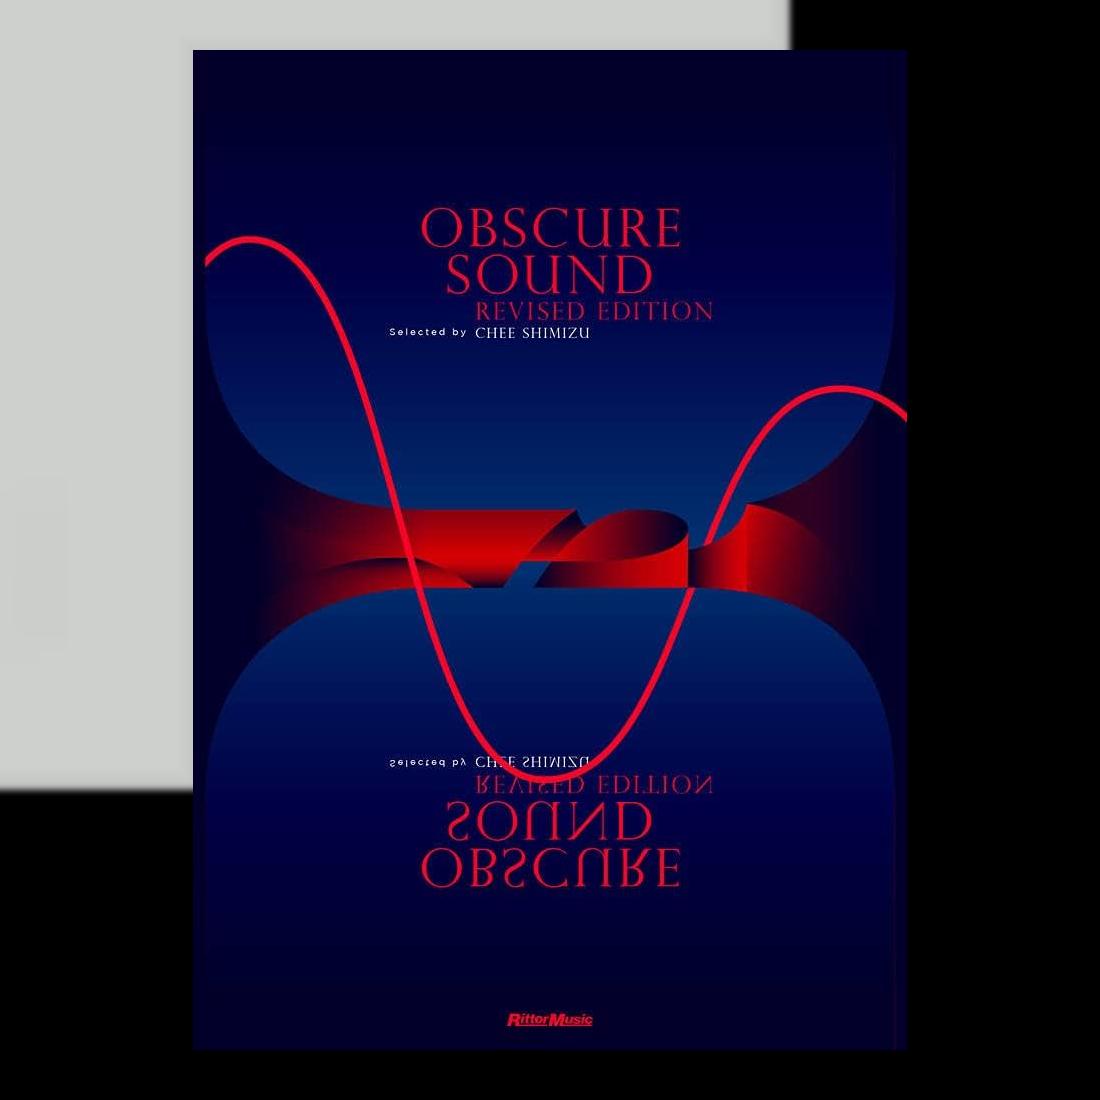 Chee Shimizu - OBSCURE SOUND REVISED EDITION : BOOK